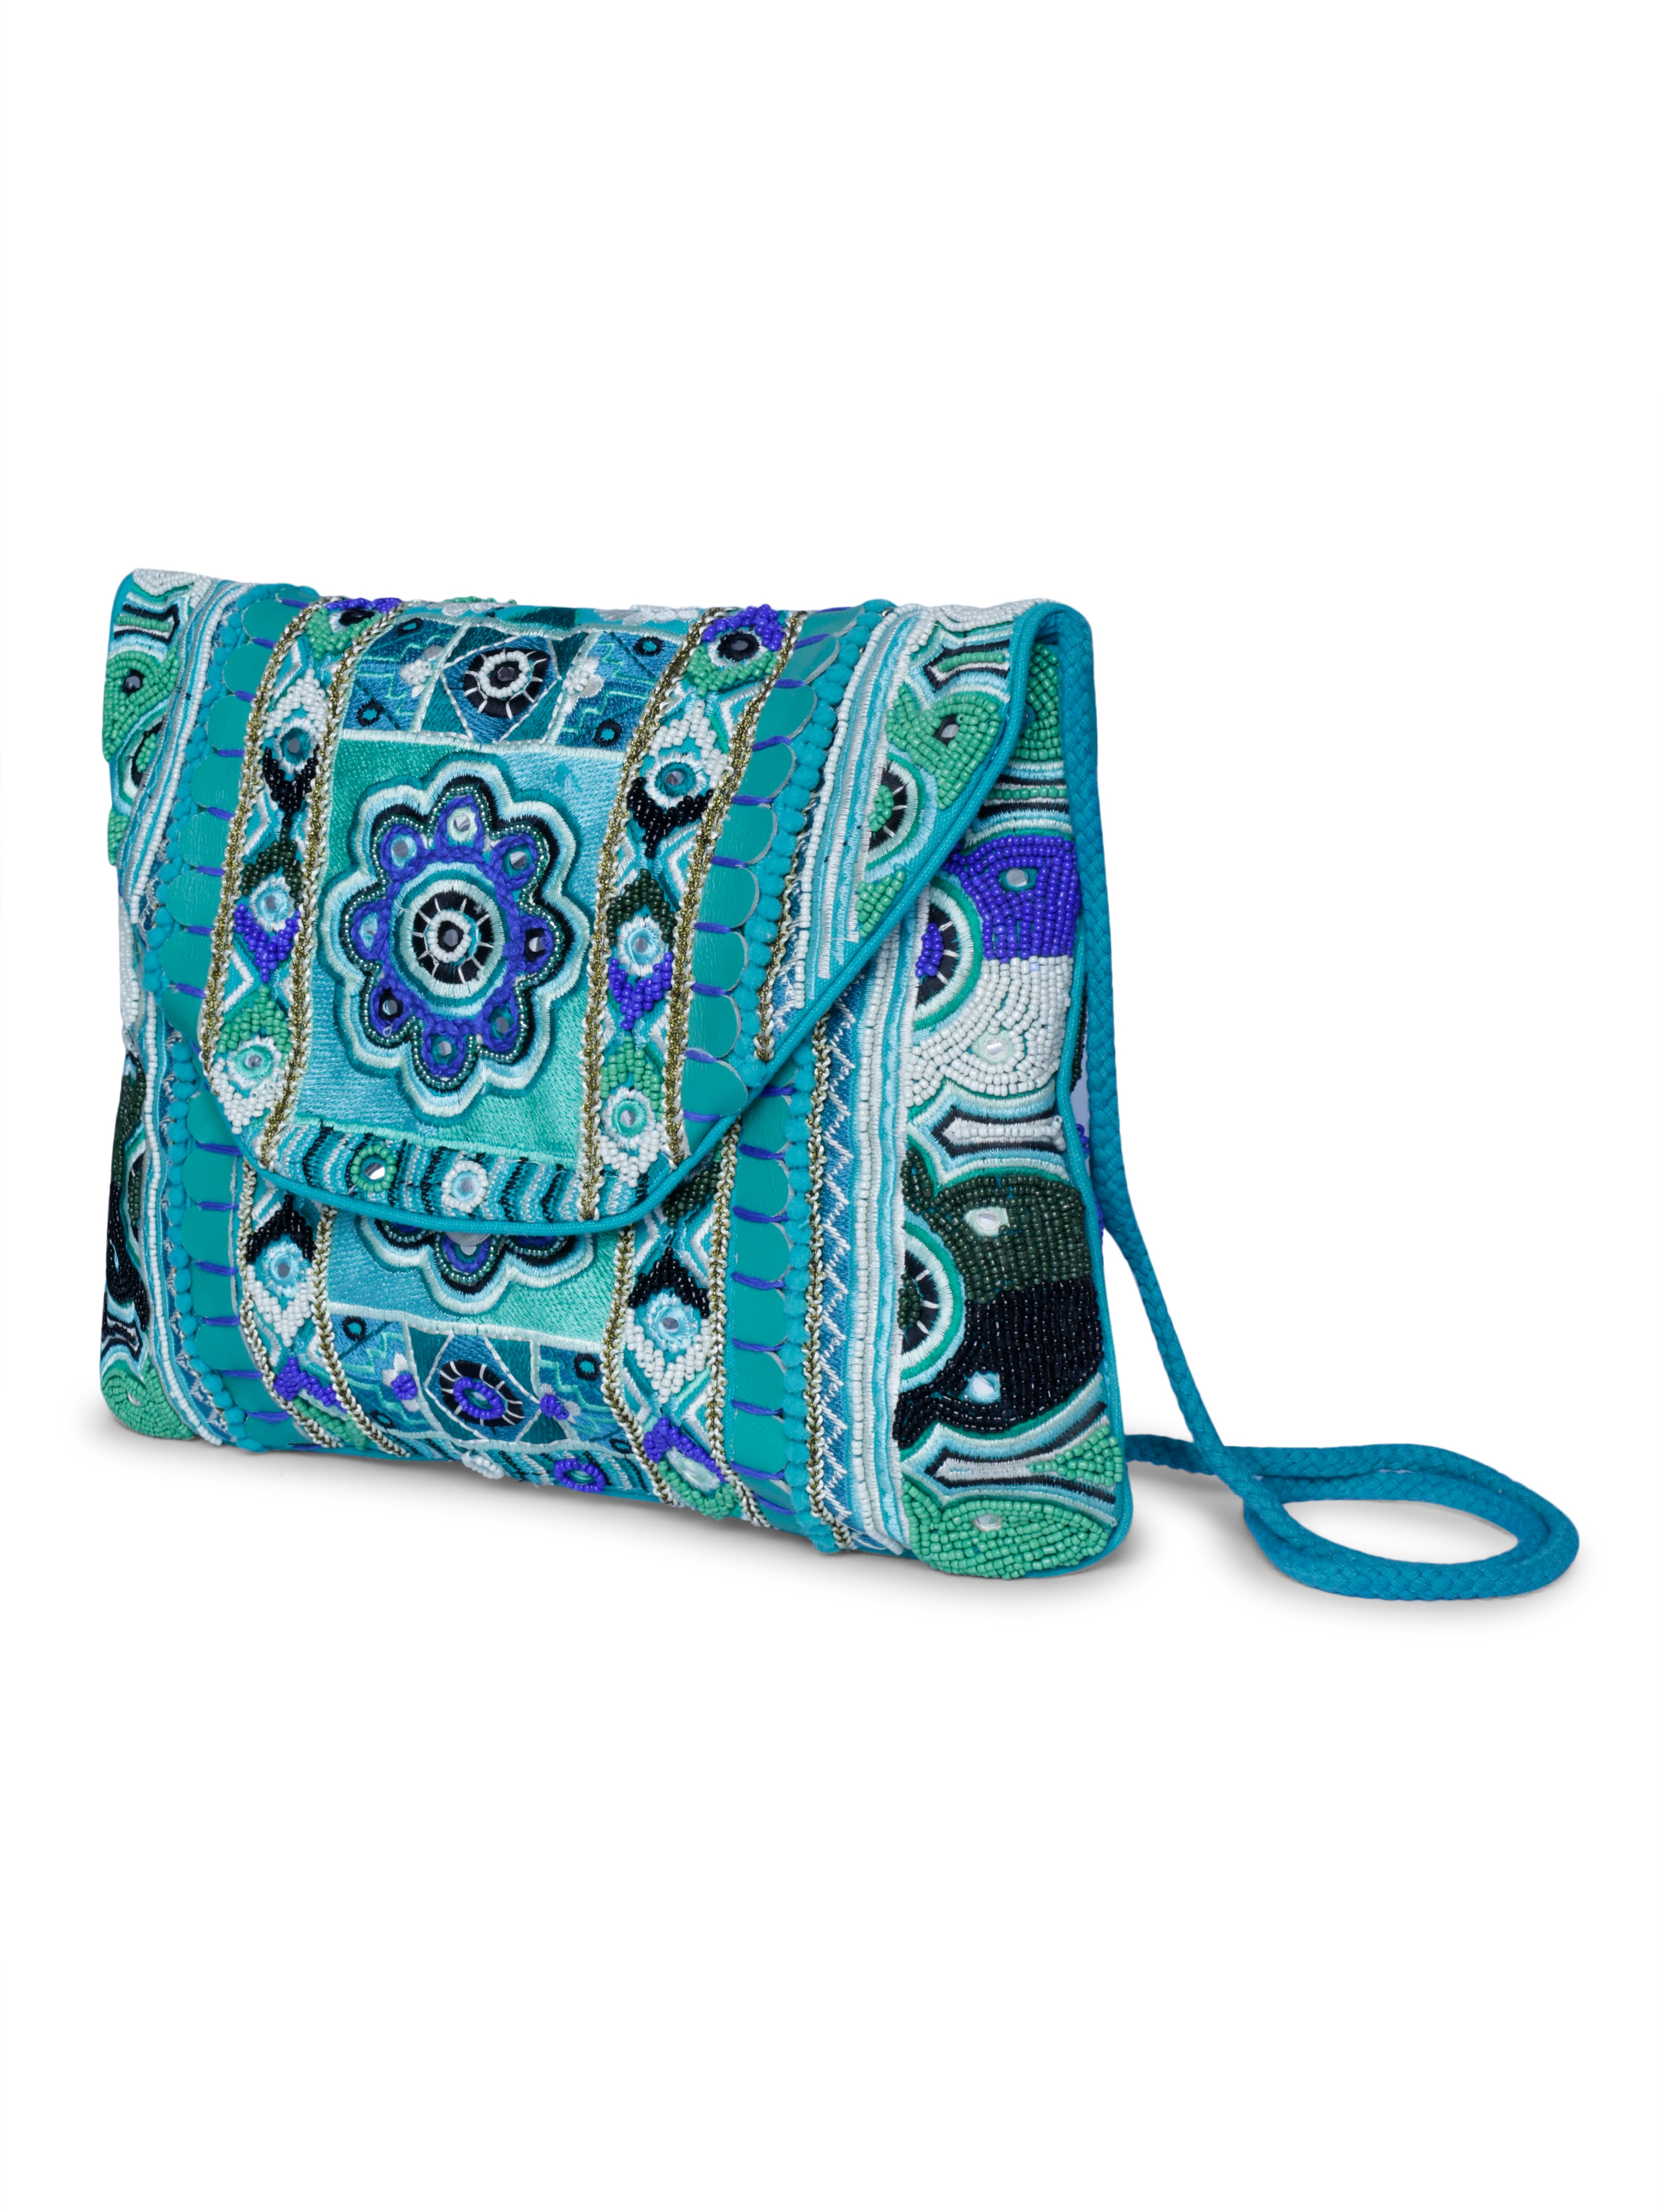 Turquoise waters sling bag